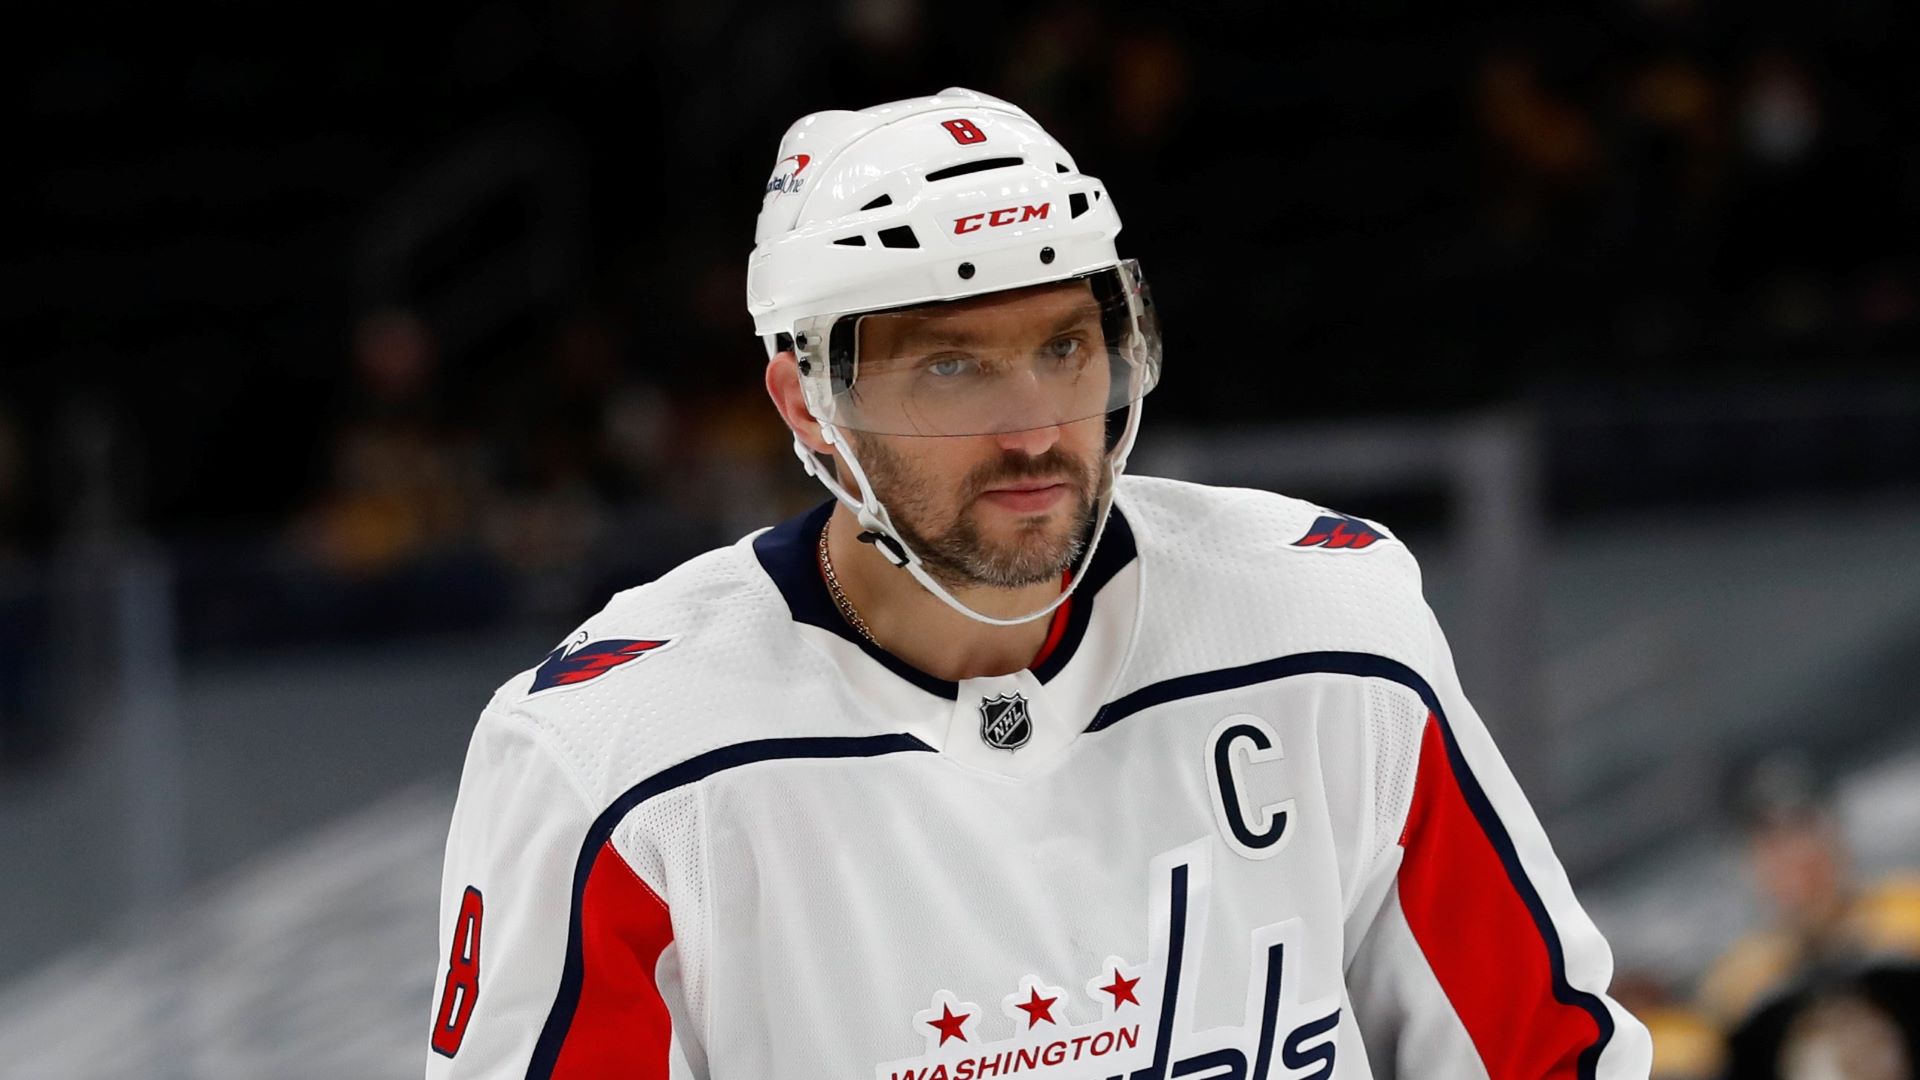 Alex Ovechkin Ties Brett Hull for 4th All-Time in Goals in NHL History